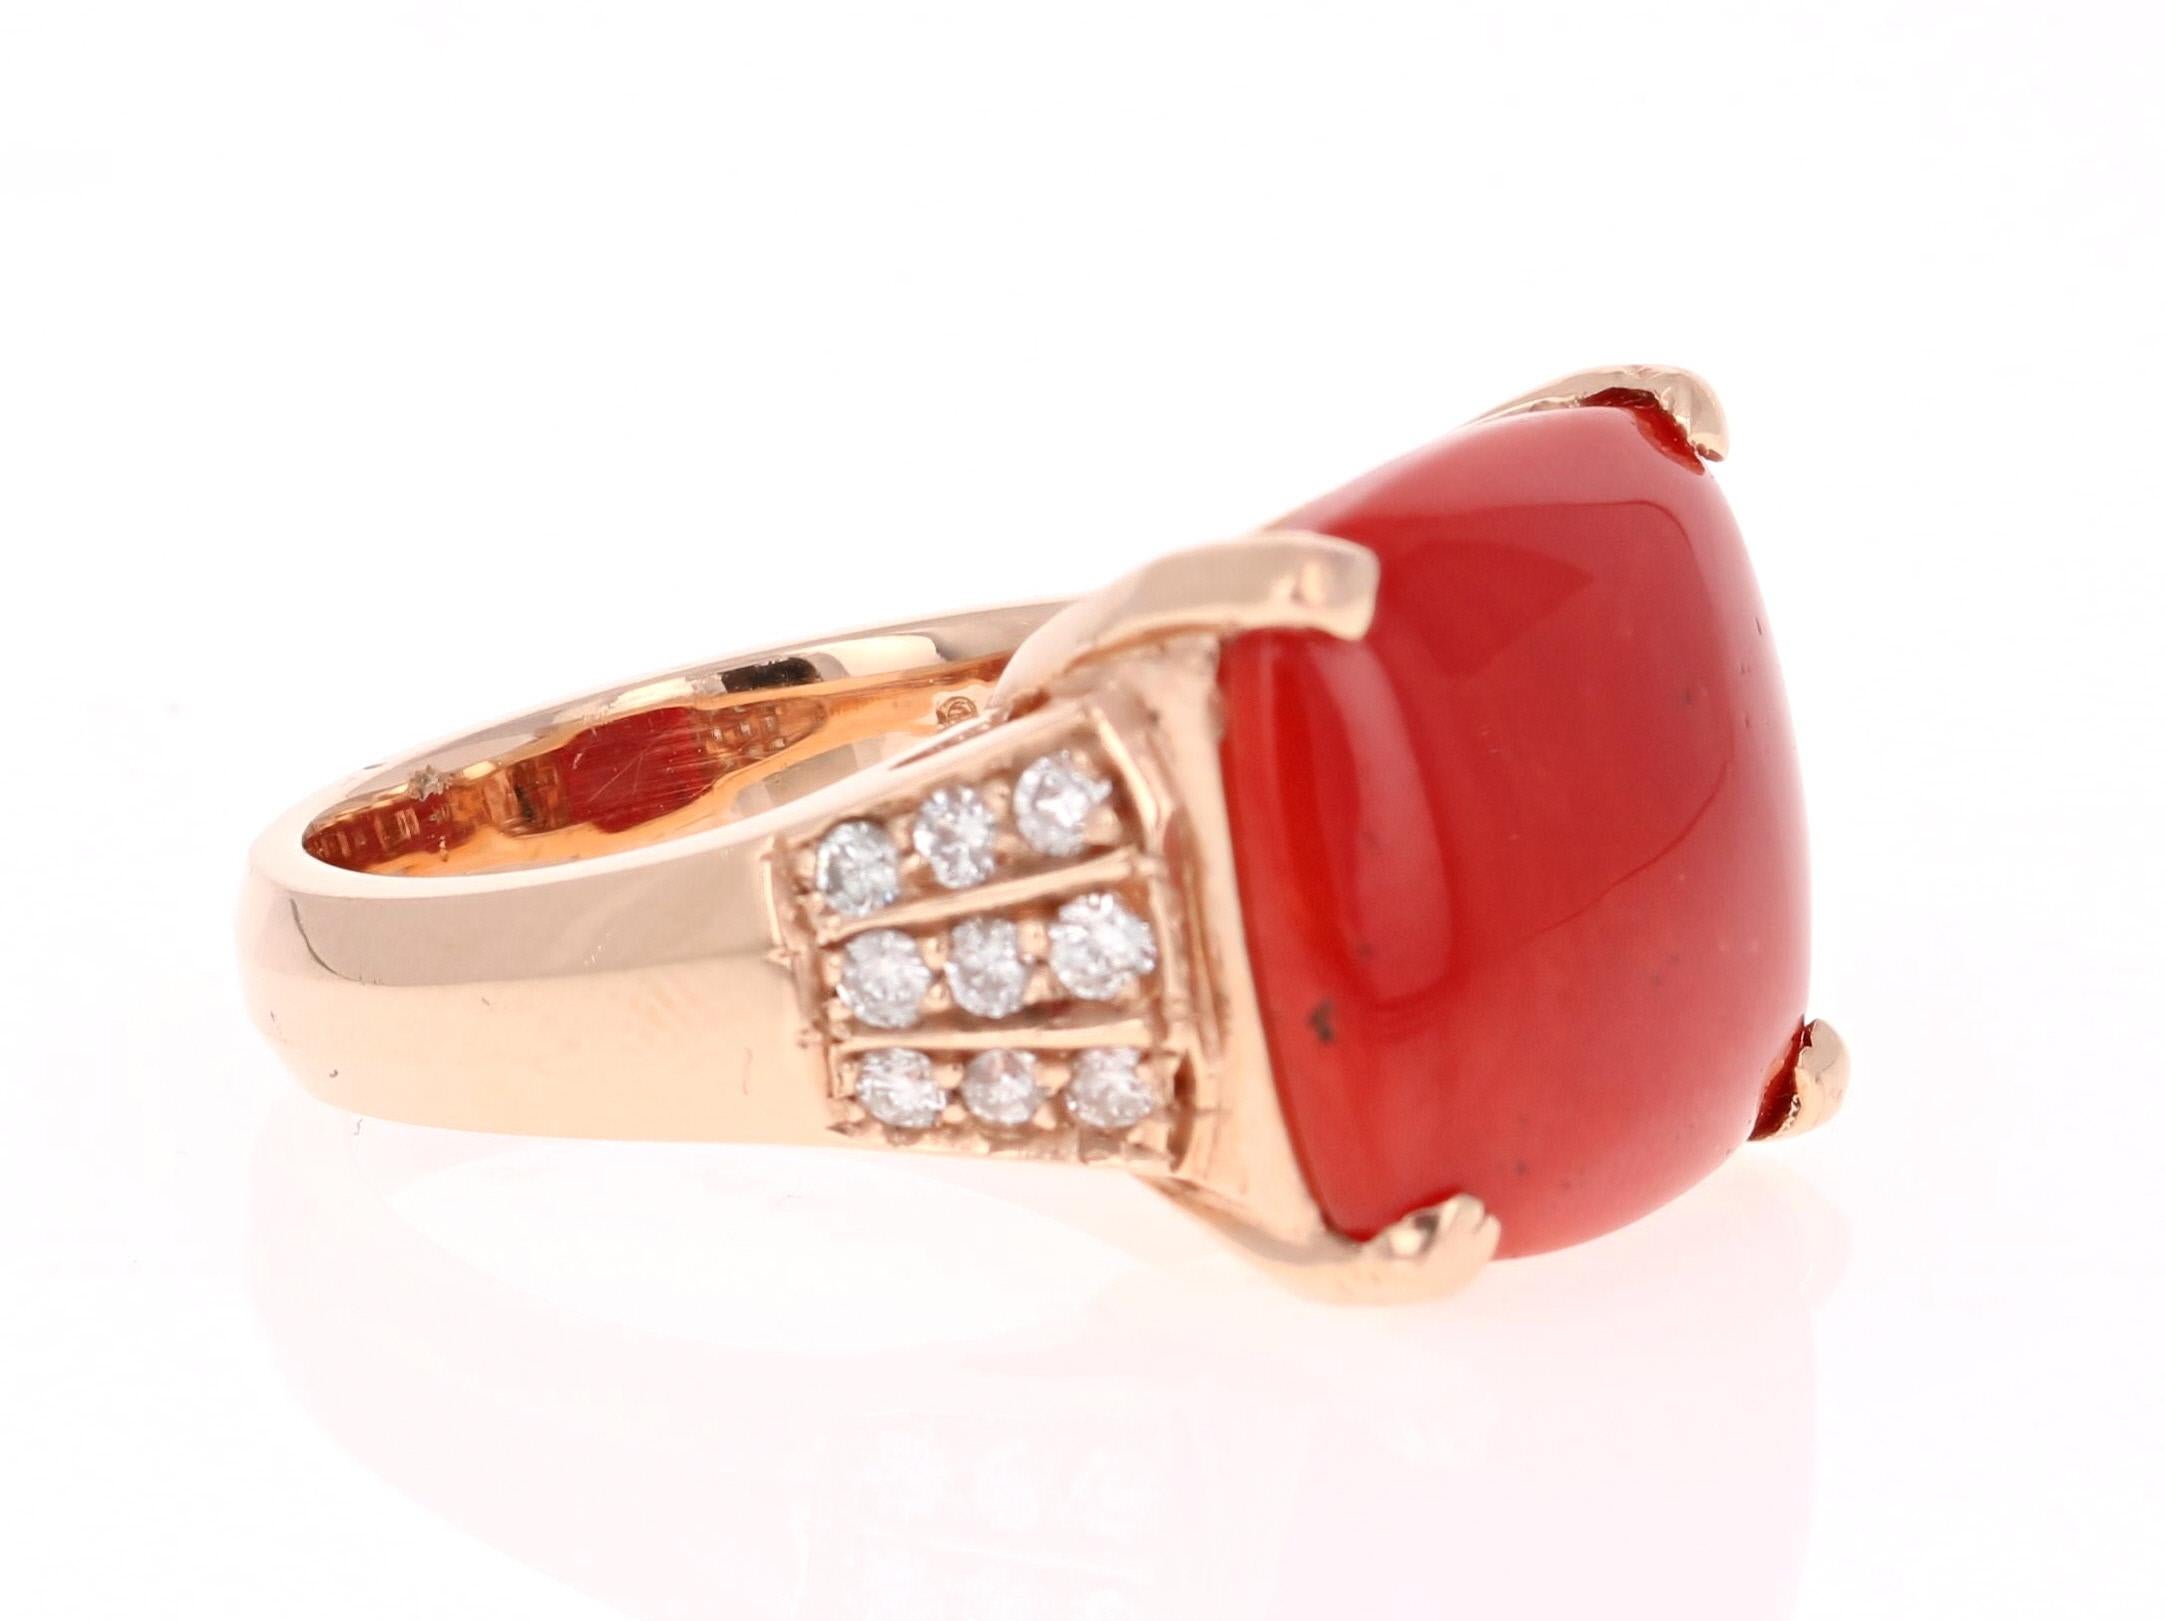 A stunning Coral and Diamond Cocktail Ring! 

This one of a kind beauty has a magnificent 6.90 Carat Square Cushion Cut Coral. It is further embellished with 18 Round Cut Diamonds that weigh 0.40 Carats.  The total carat weight of the ring is 7.30